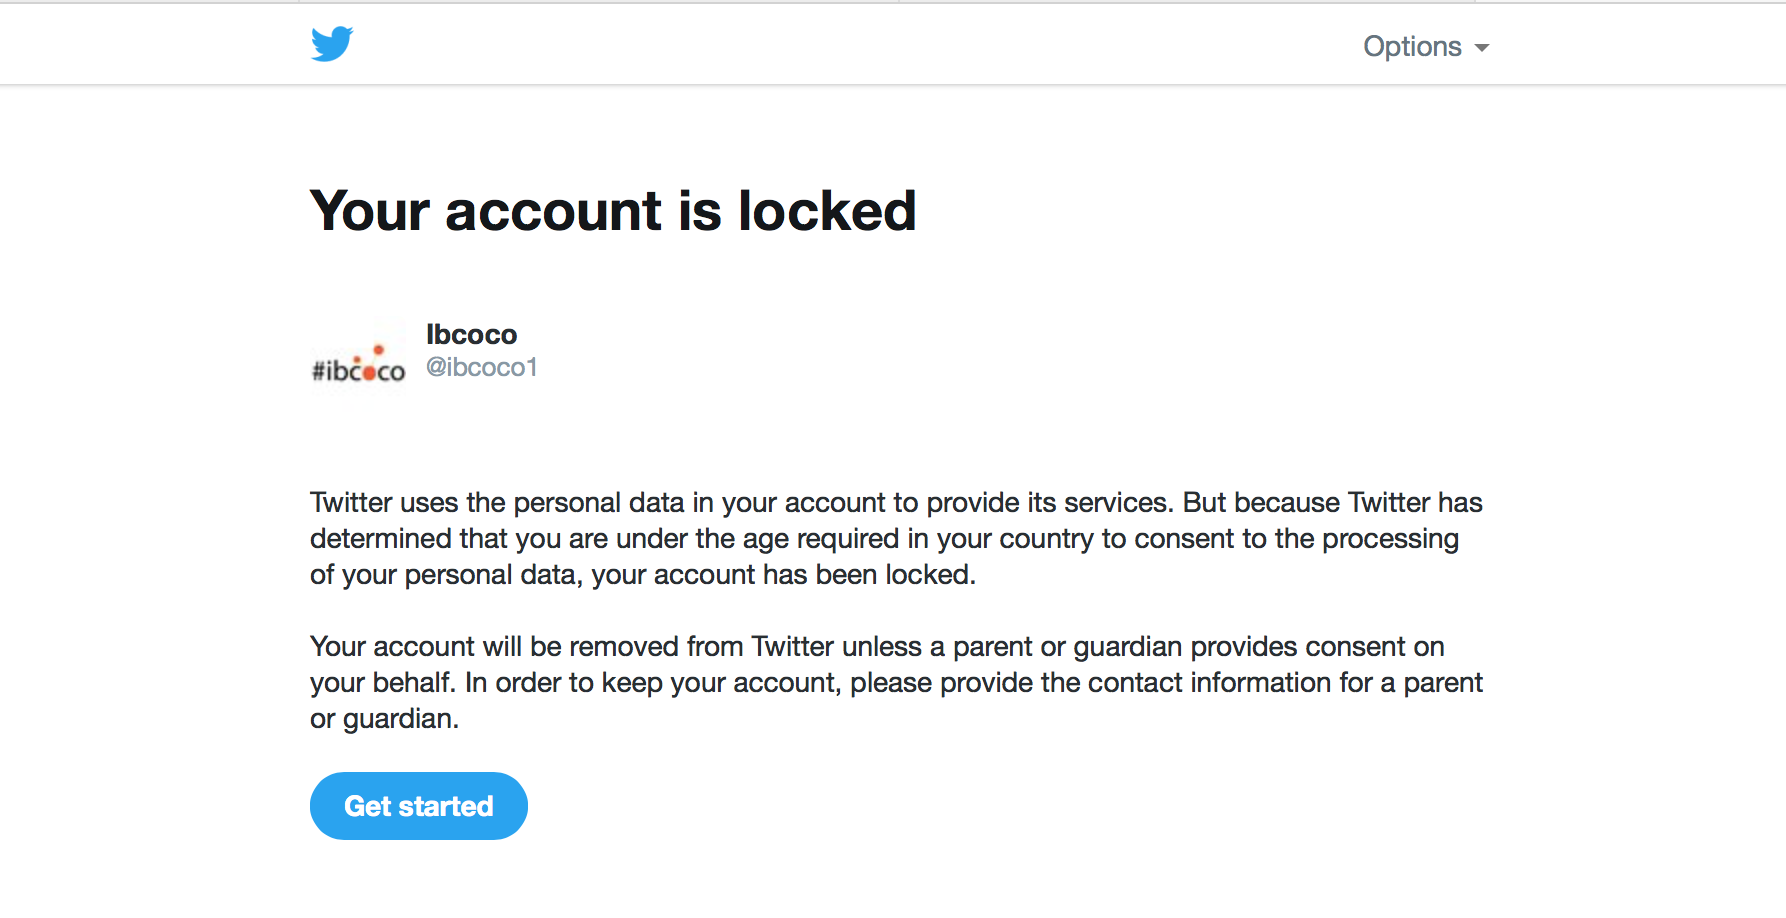 Why Twitter blocked and deleted our @ibcoco1 Twitter Account